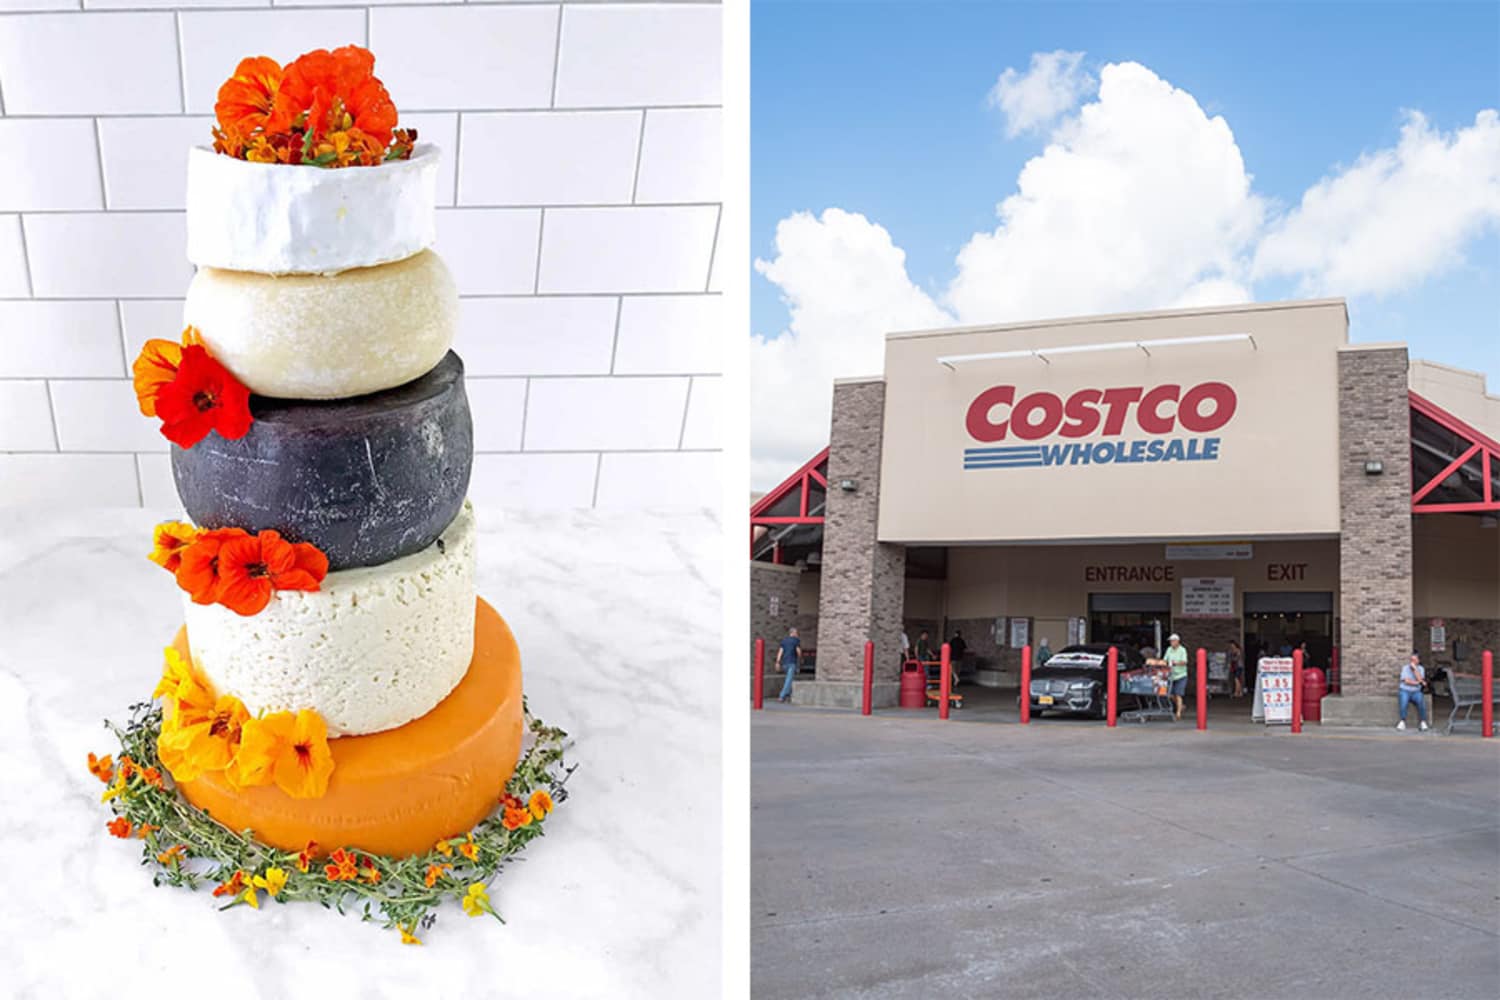 Costco’s New Wedding Cake Is Made Completely Out of Cheese